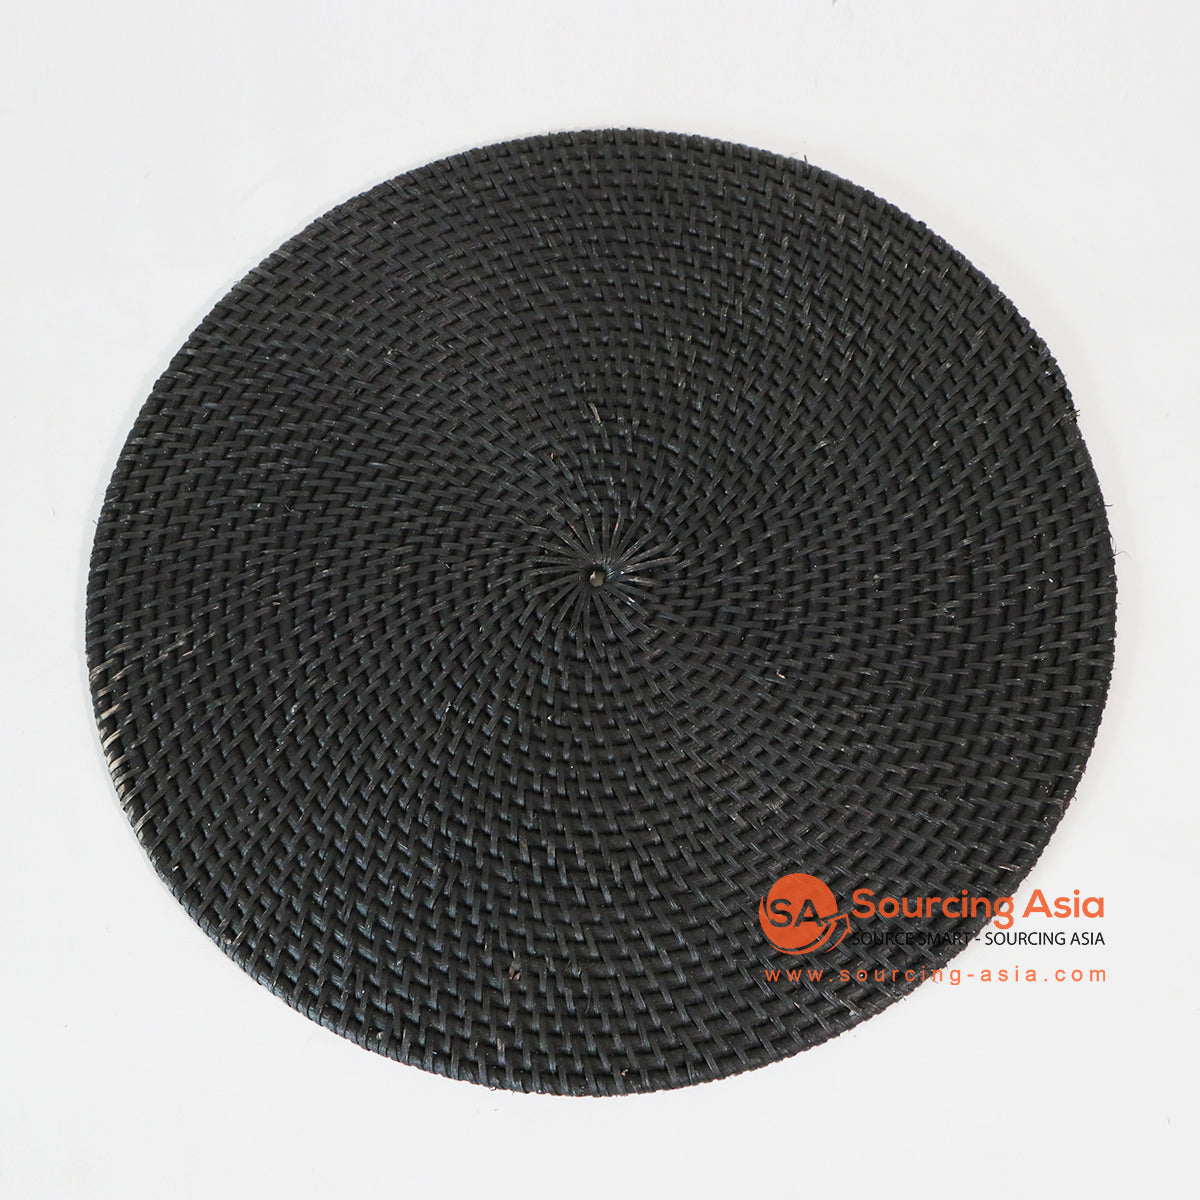 MTIC033-6 BLACK WOVEN RATTAN PLACEMAT